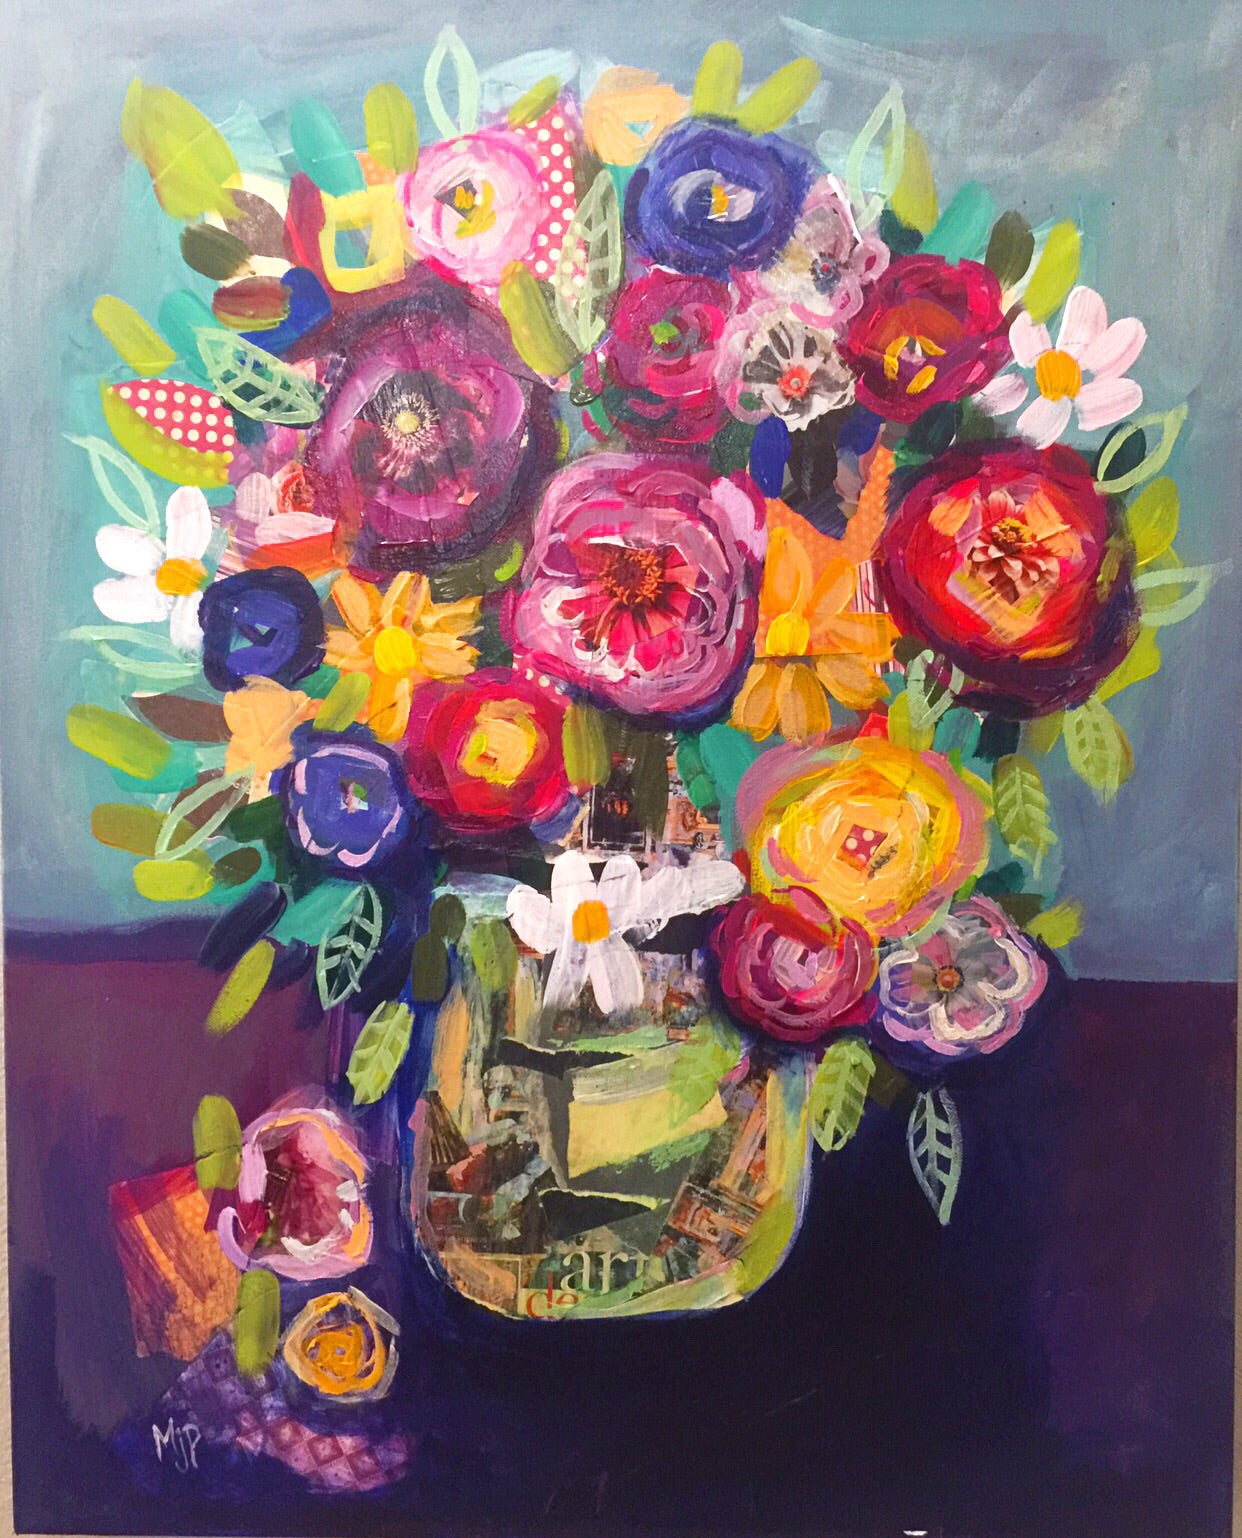 Large Vibrant Acrylic & Collage Floral Painting